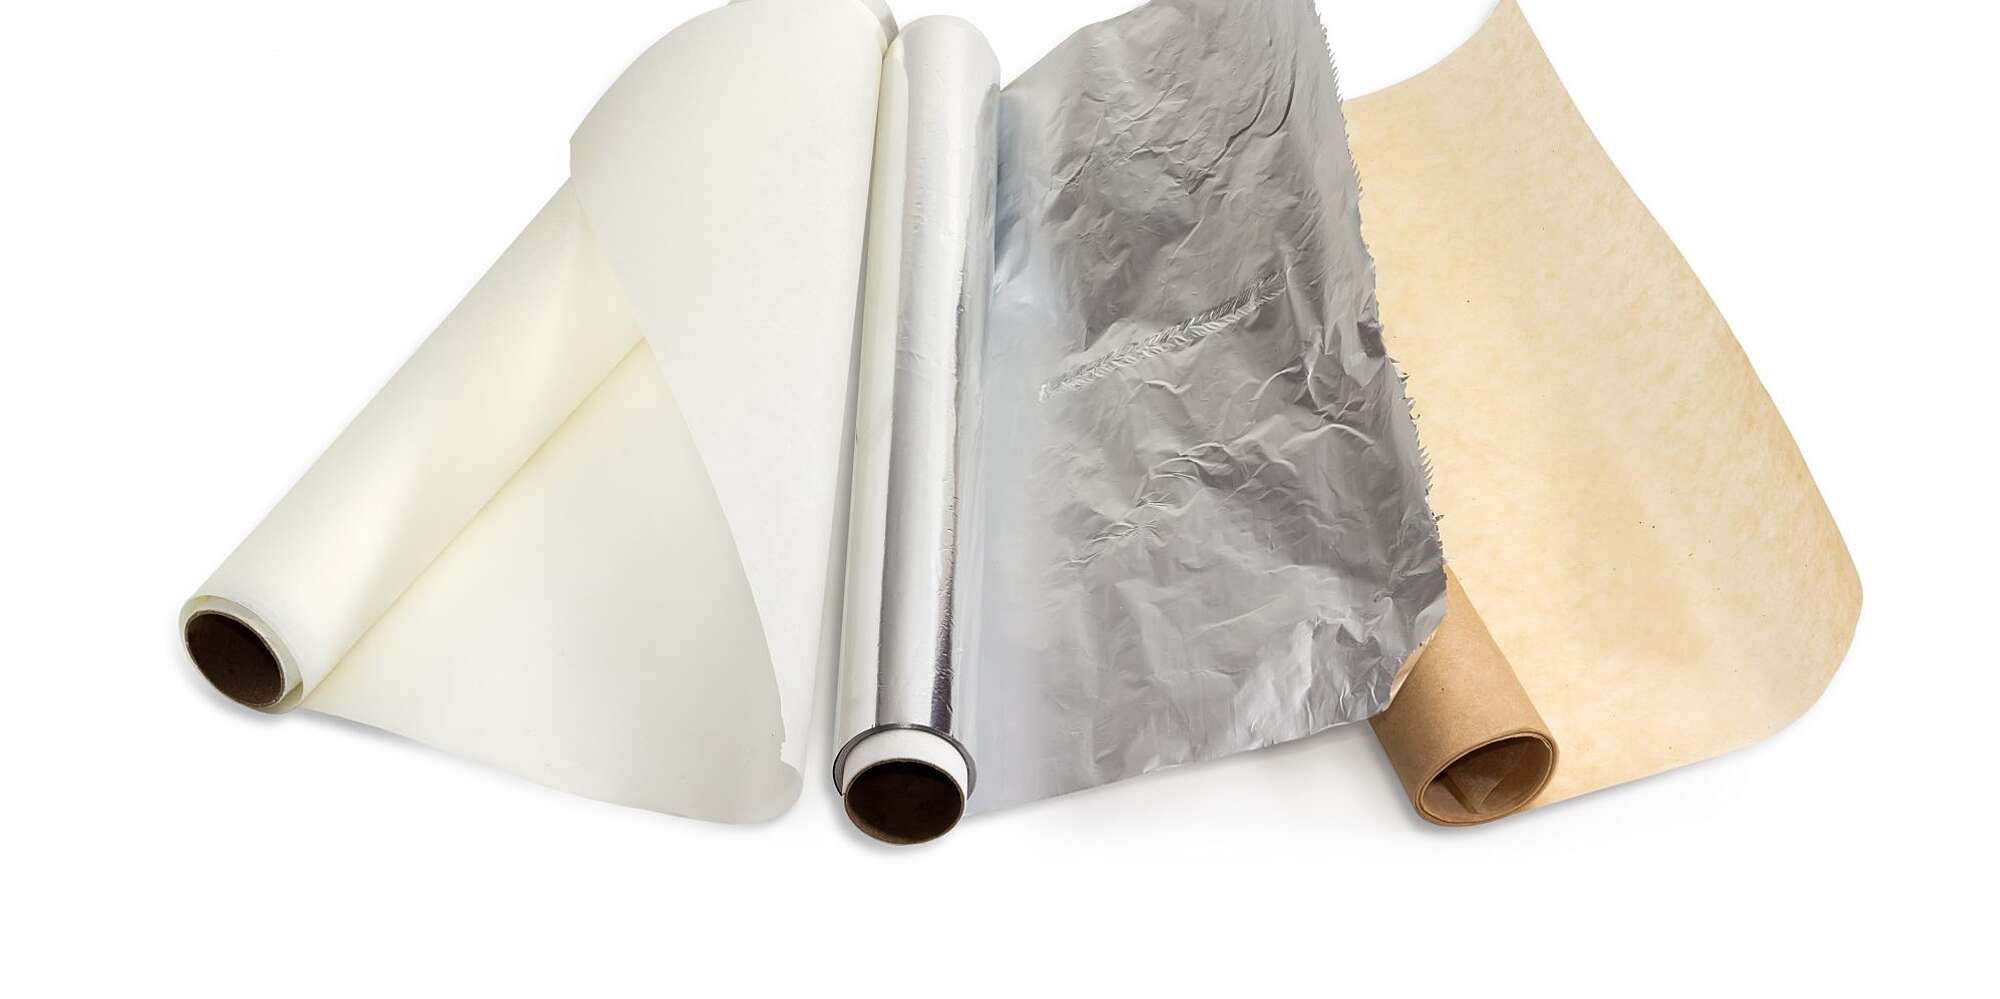 A Guide to Using Parchment Paper, Wax Paper, and Aluminum Foil